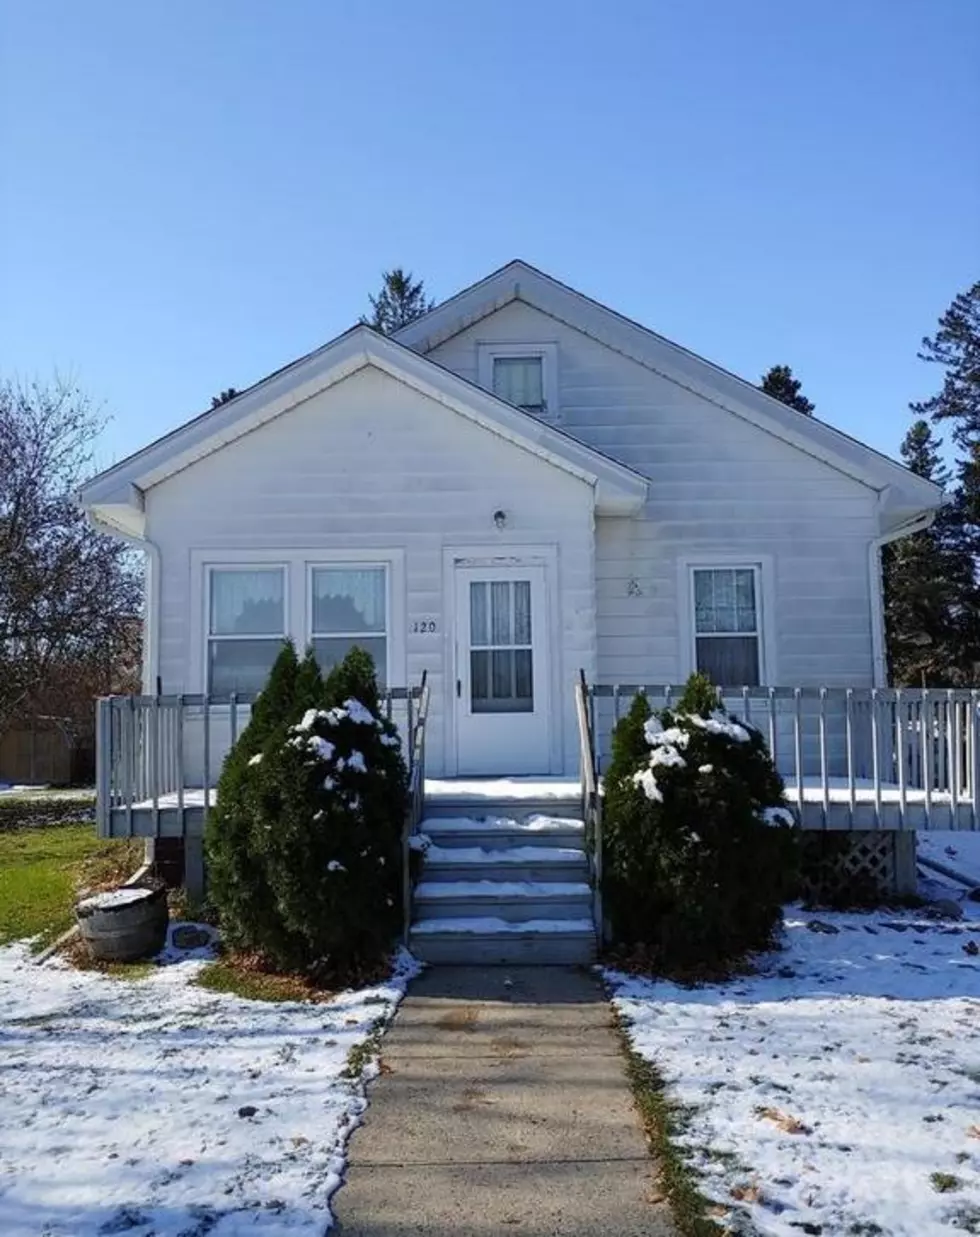 Here Are 6 Houses For Sale In SE Minnesota For Less Than $50K